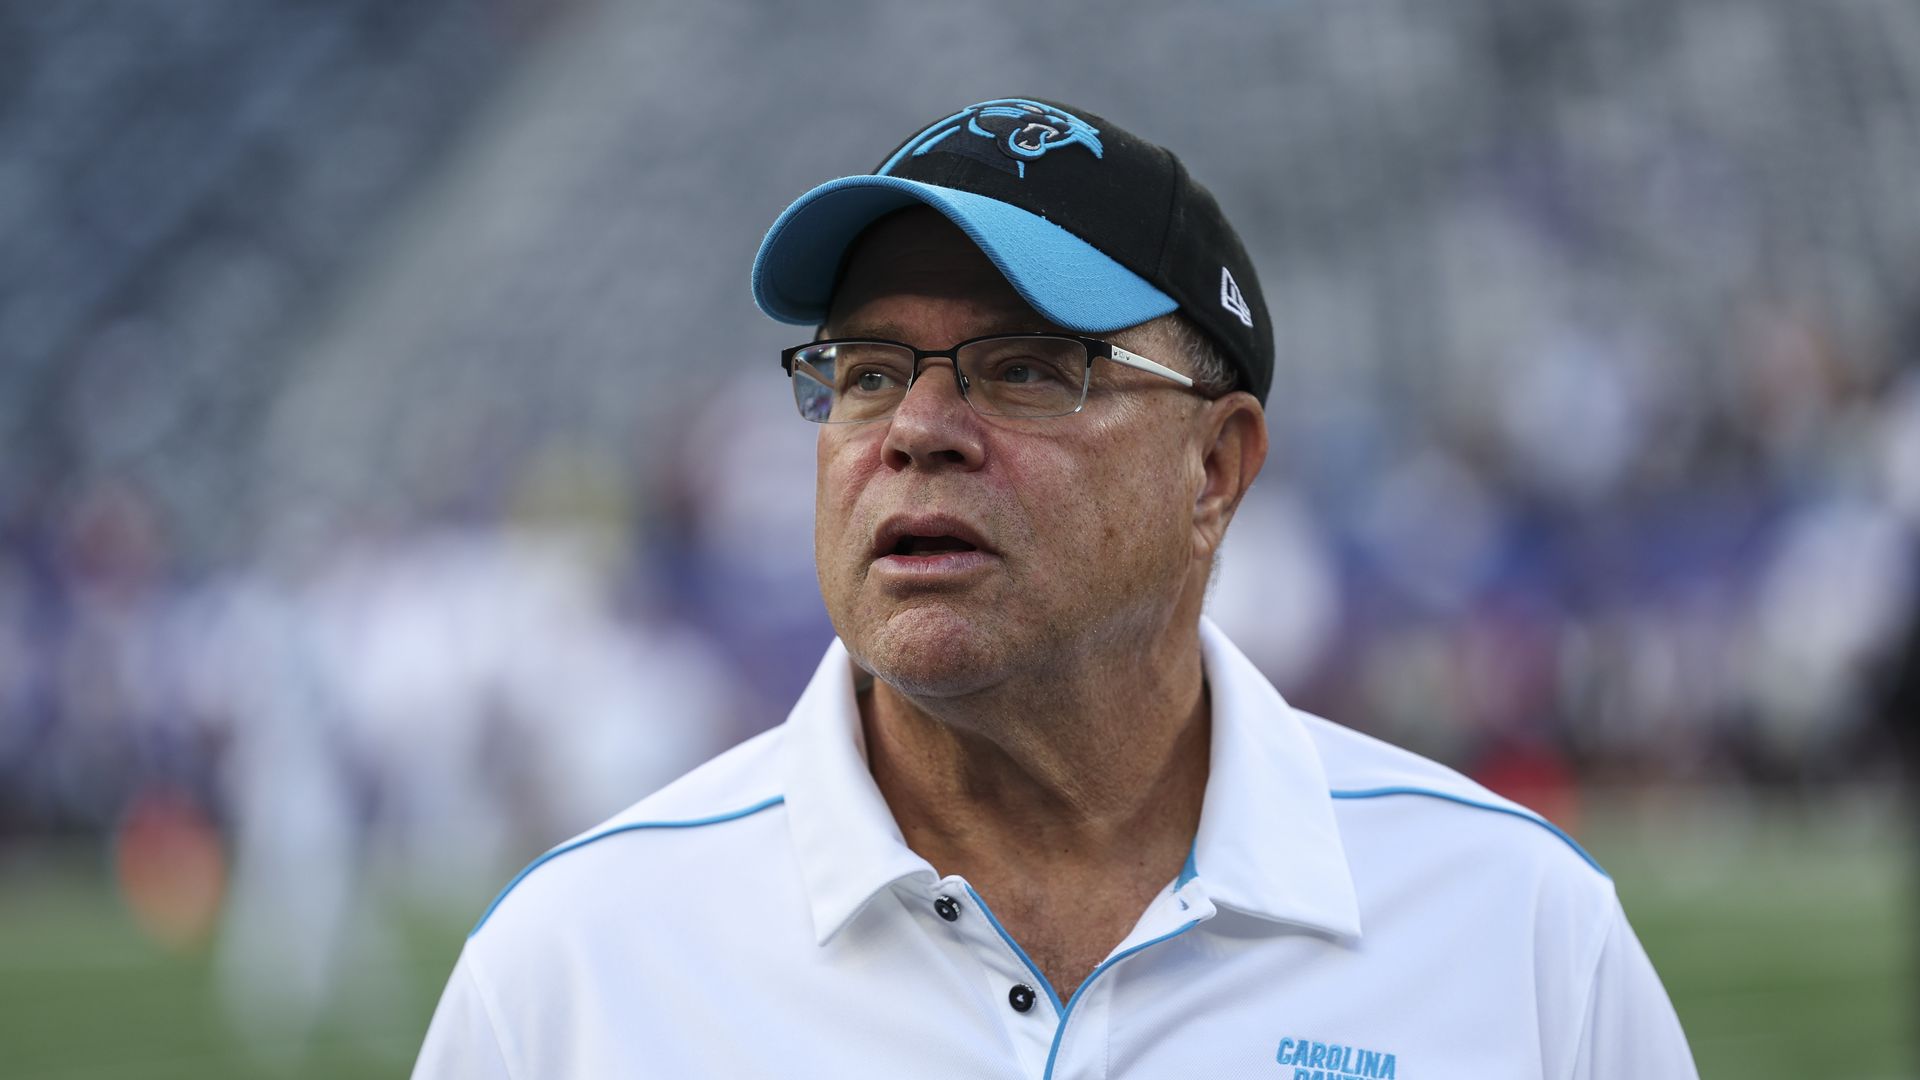 13 panthers head coach candidates, ranked from safe to hilarious